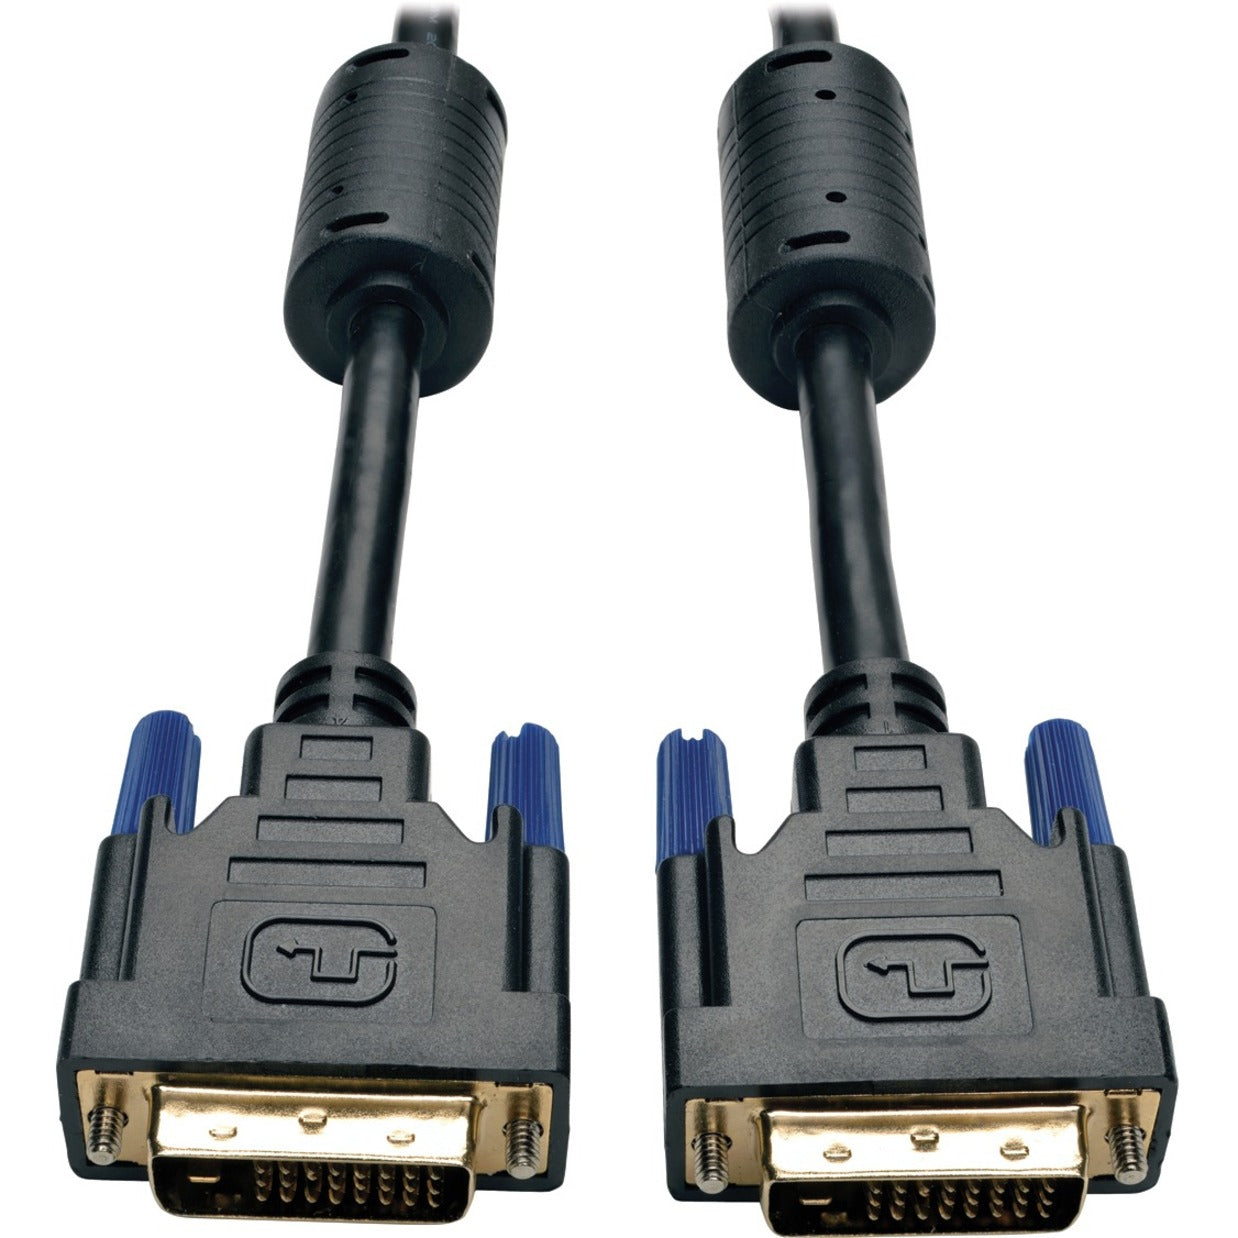 Tripp Lite P560-100-HD 100-ft. DVI High Definition Dual Link TMDS Cable, Molded, Ferrite Bead, Copper Conductor, Shielded, Gold Plated Connectors